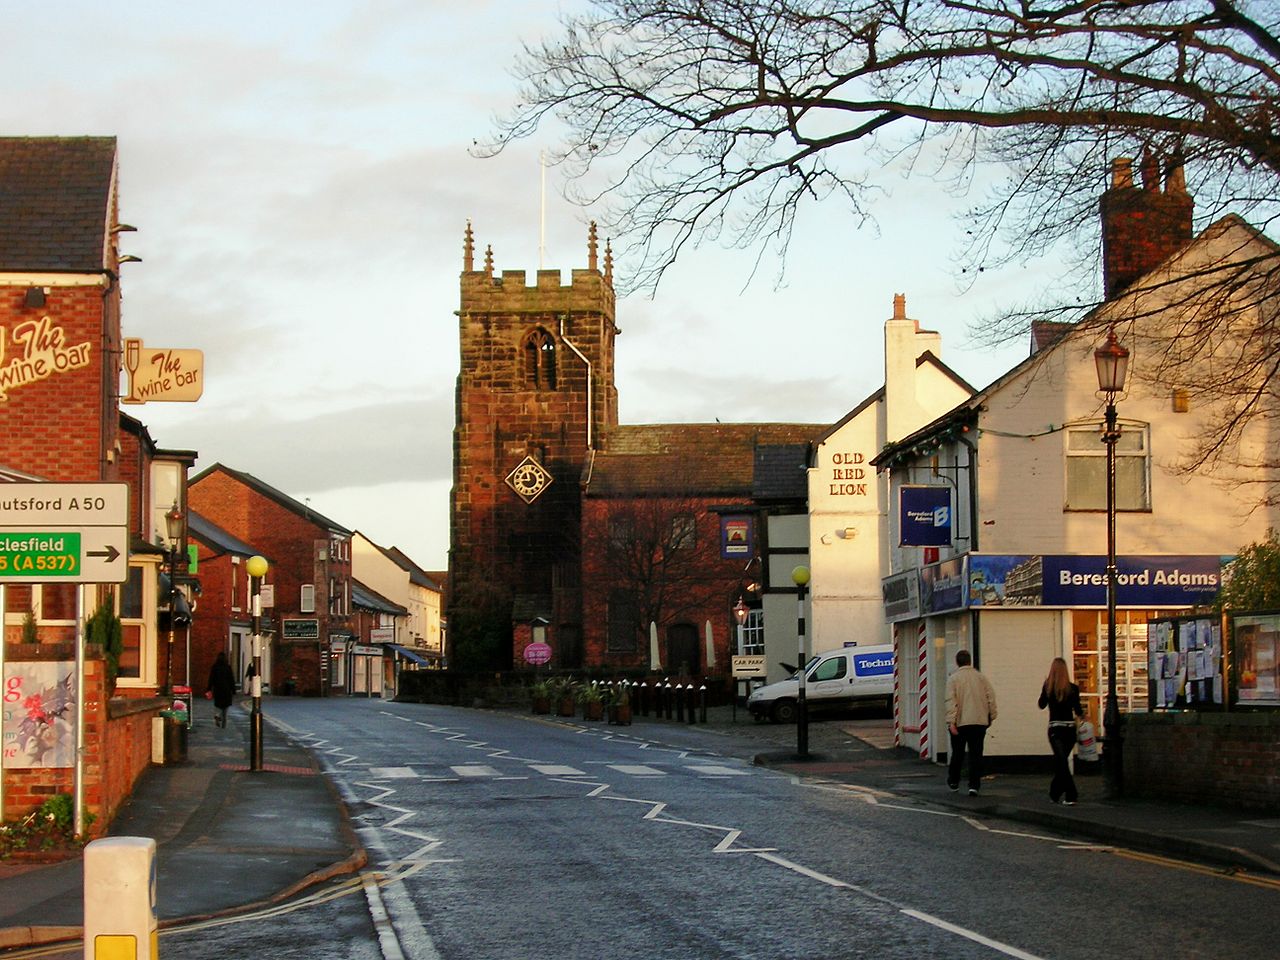 Holmes Chapel, Cheshire, where Styles worked in the local bakery